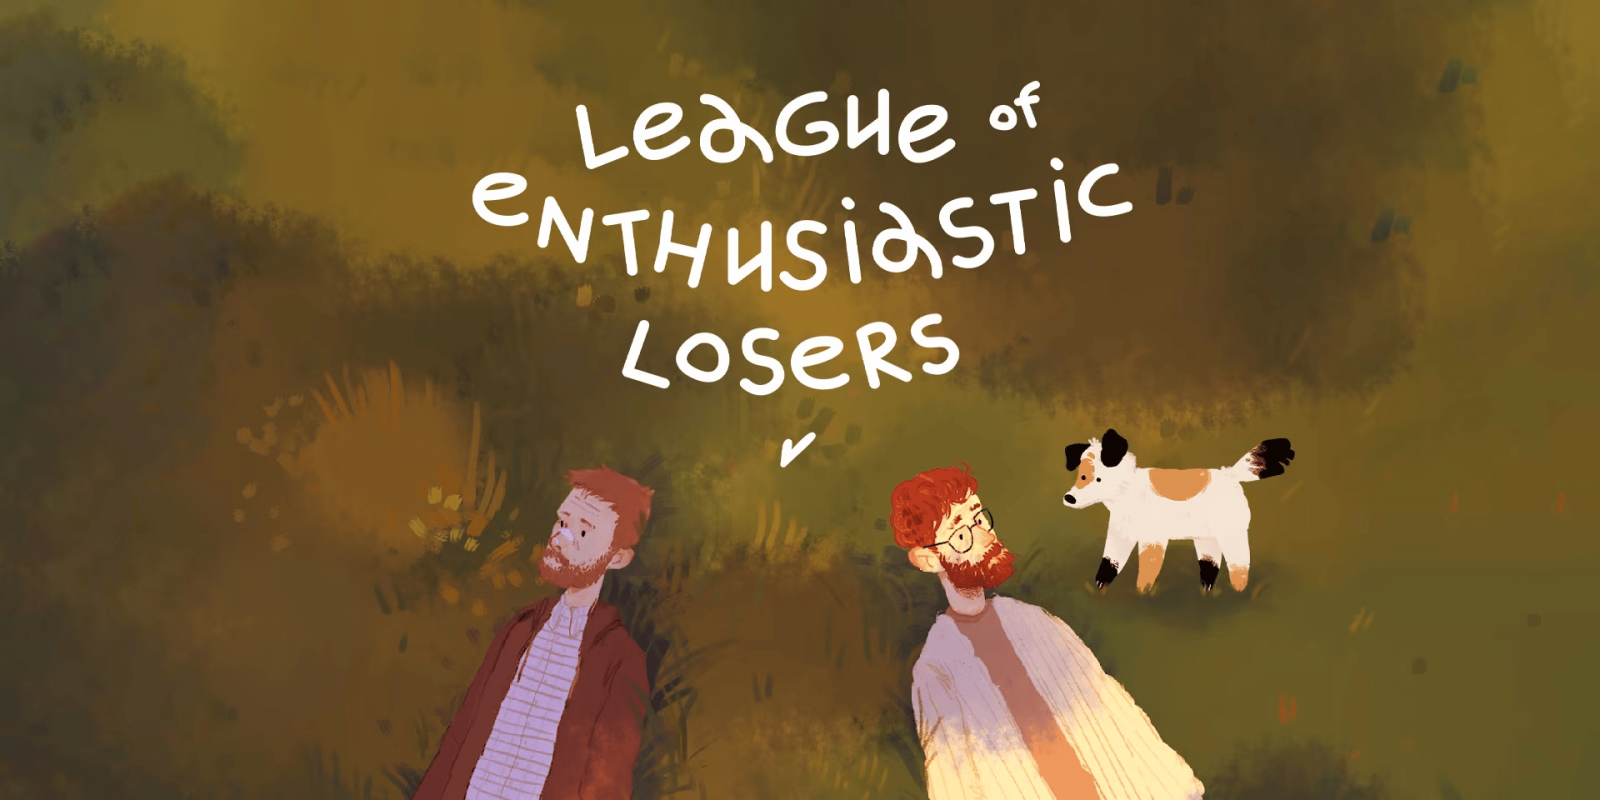 League of enthusiastic losers banner